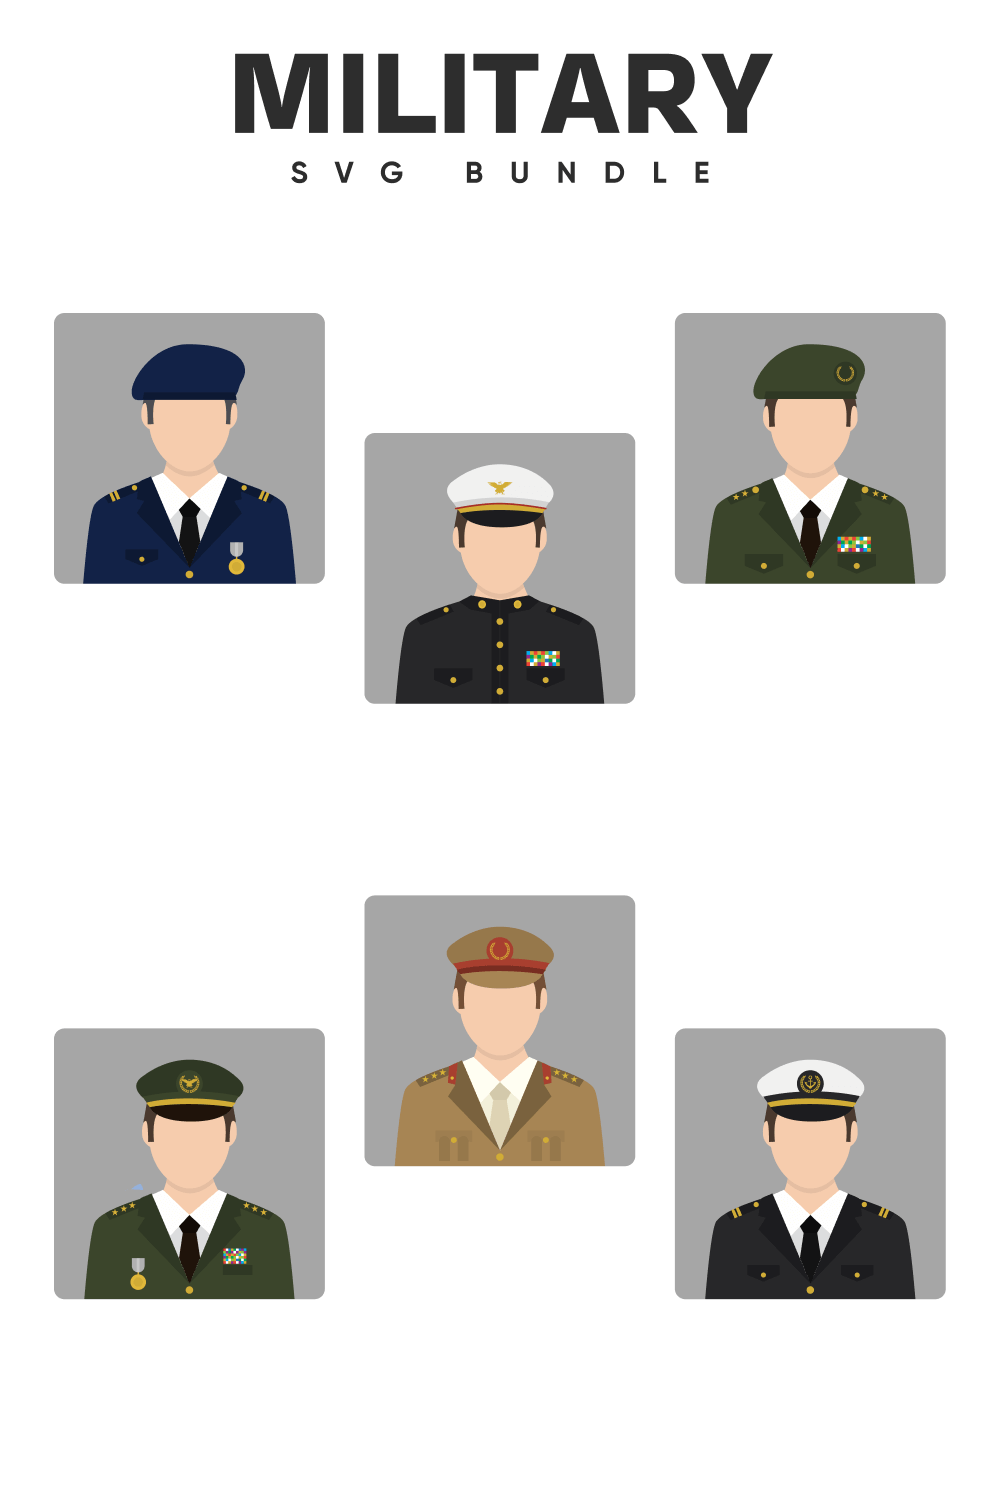 Examples of military uniforms.